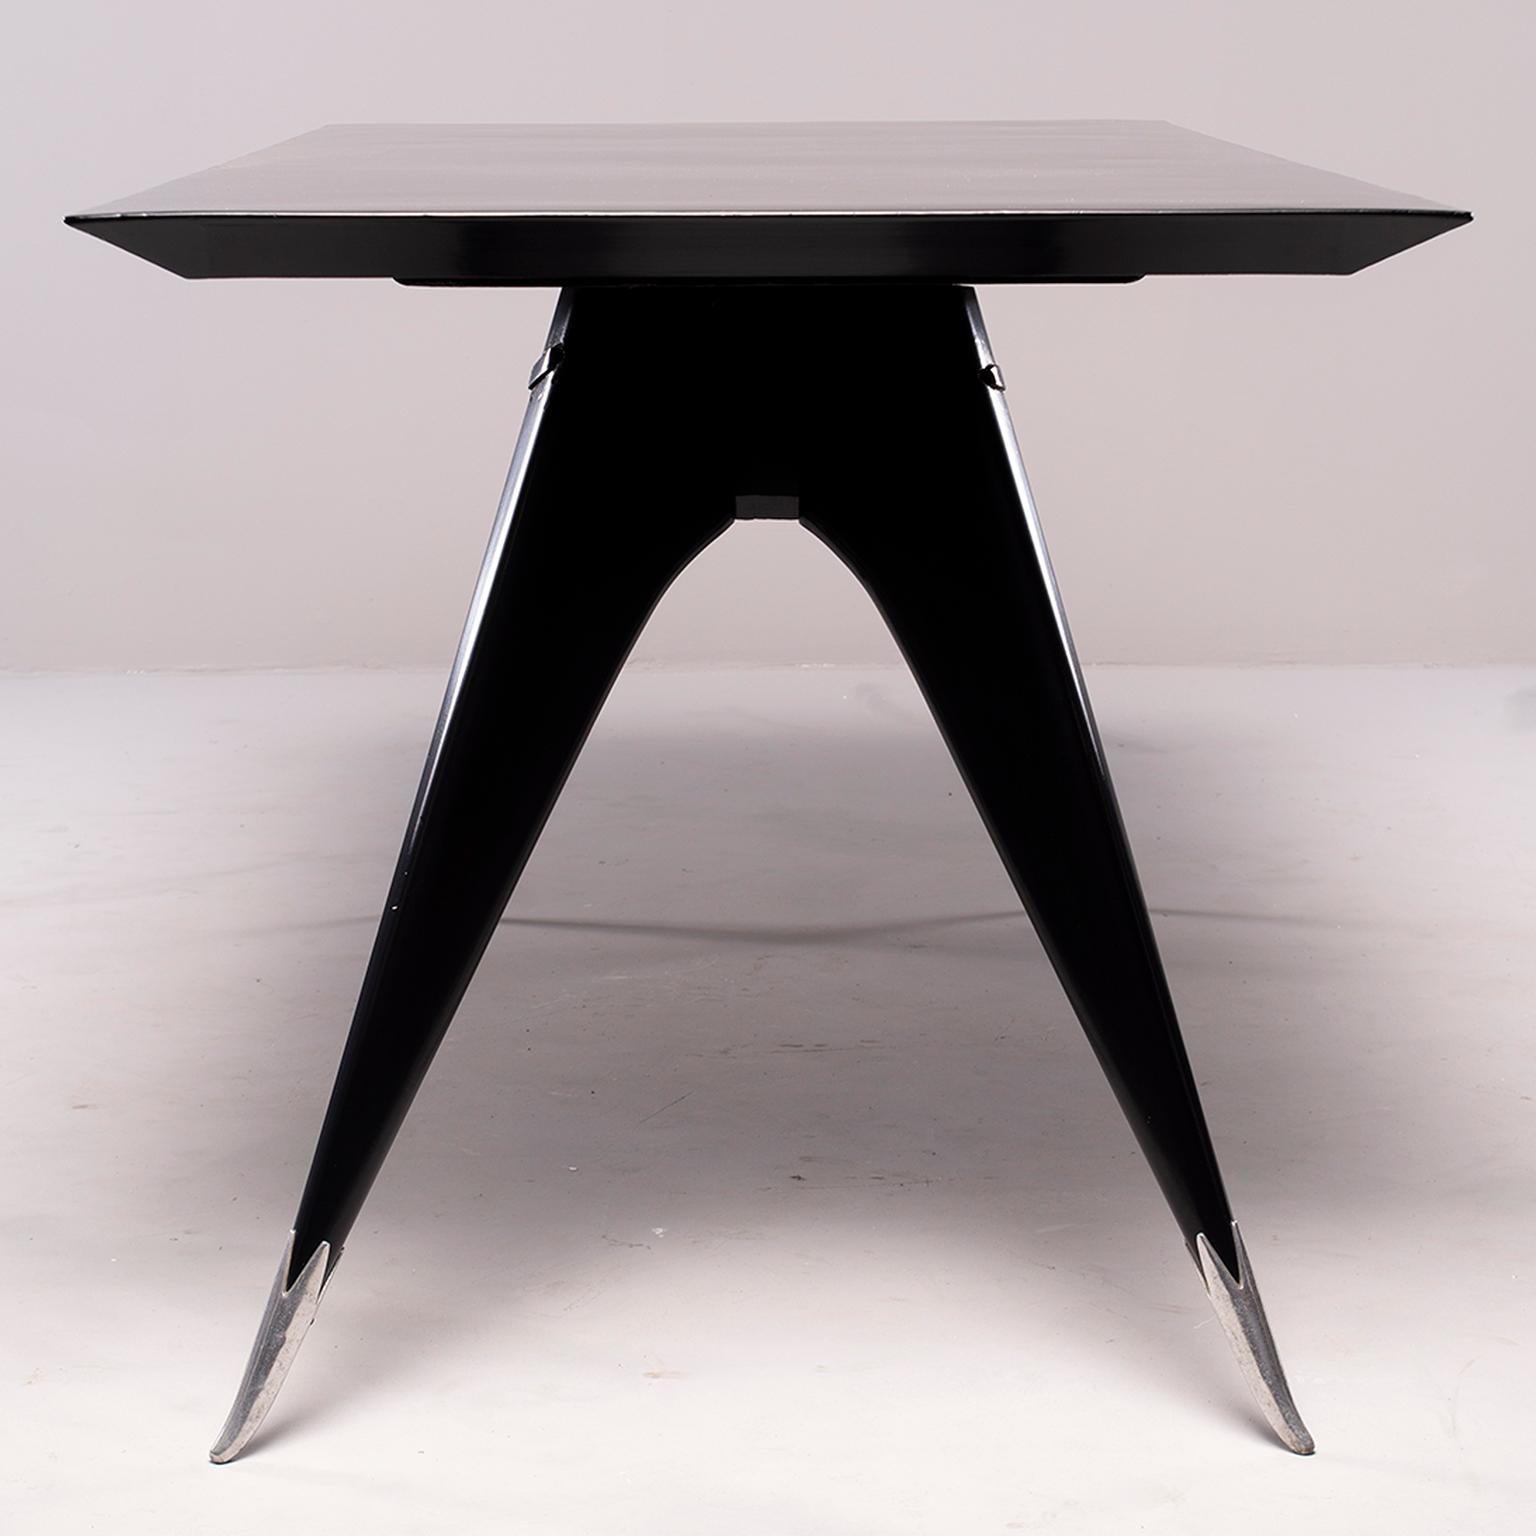 Midcentury Italian Ebonized Dining Table with Tapered Legs and Silver Leg Caps 1